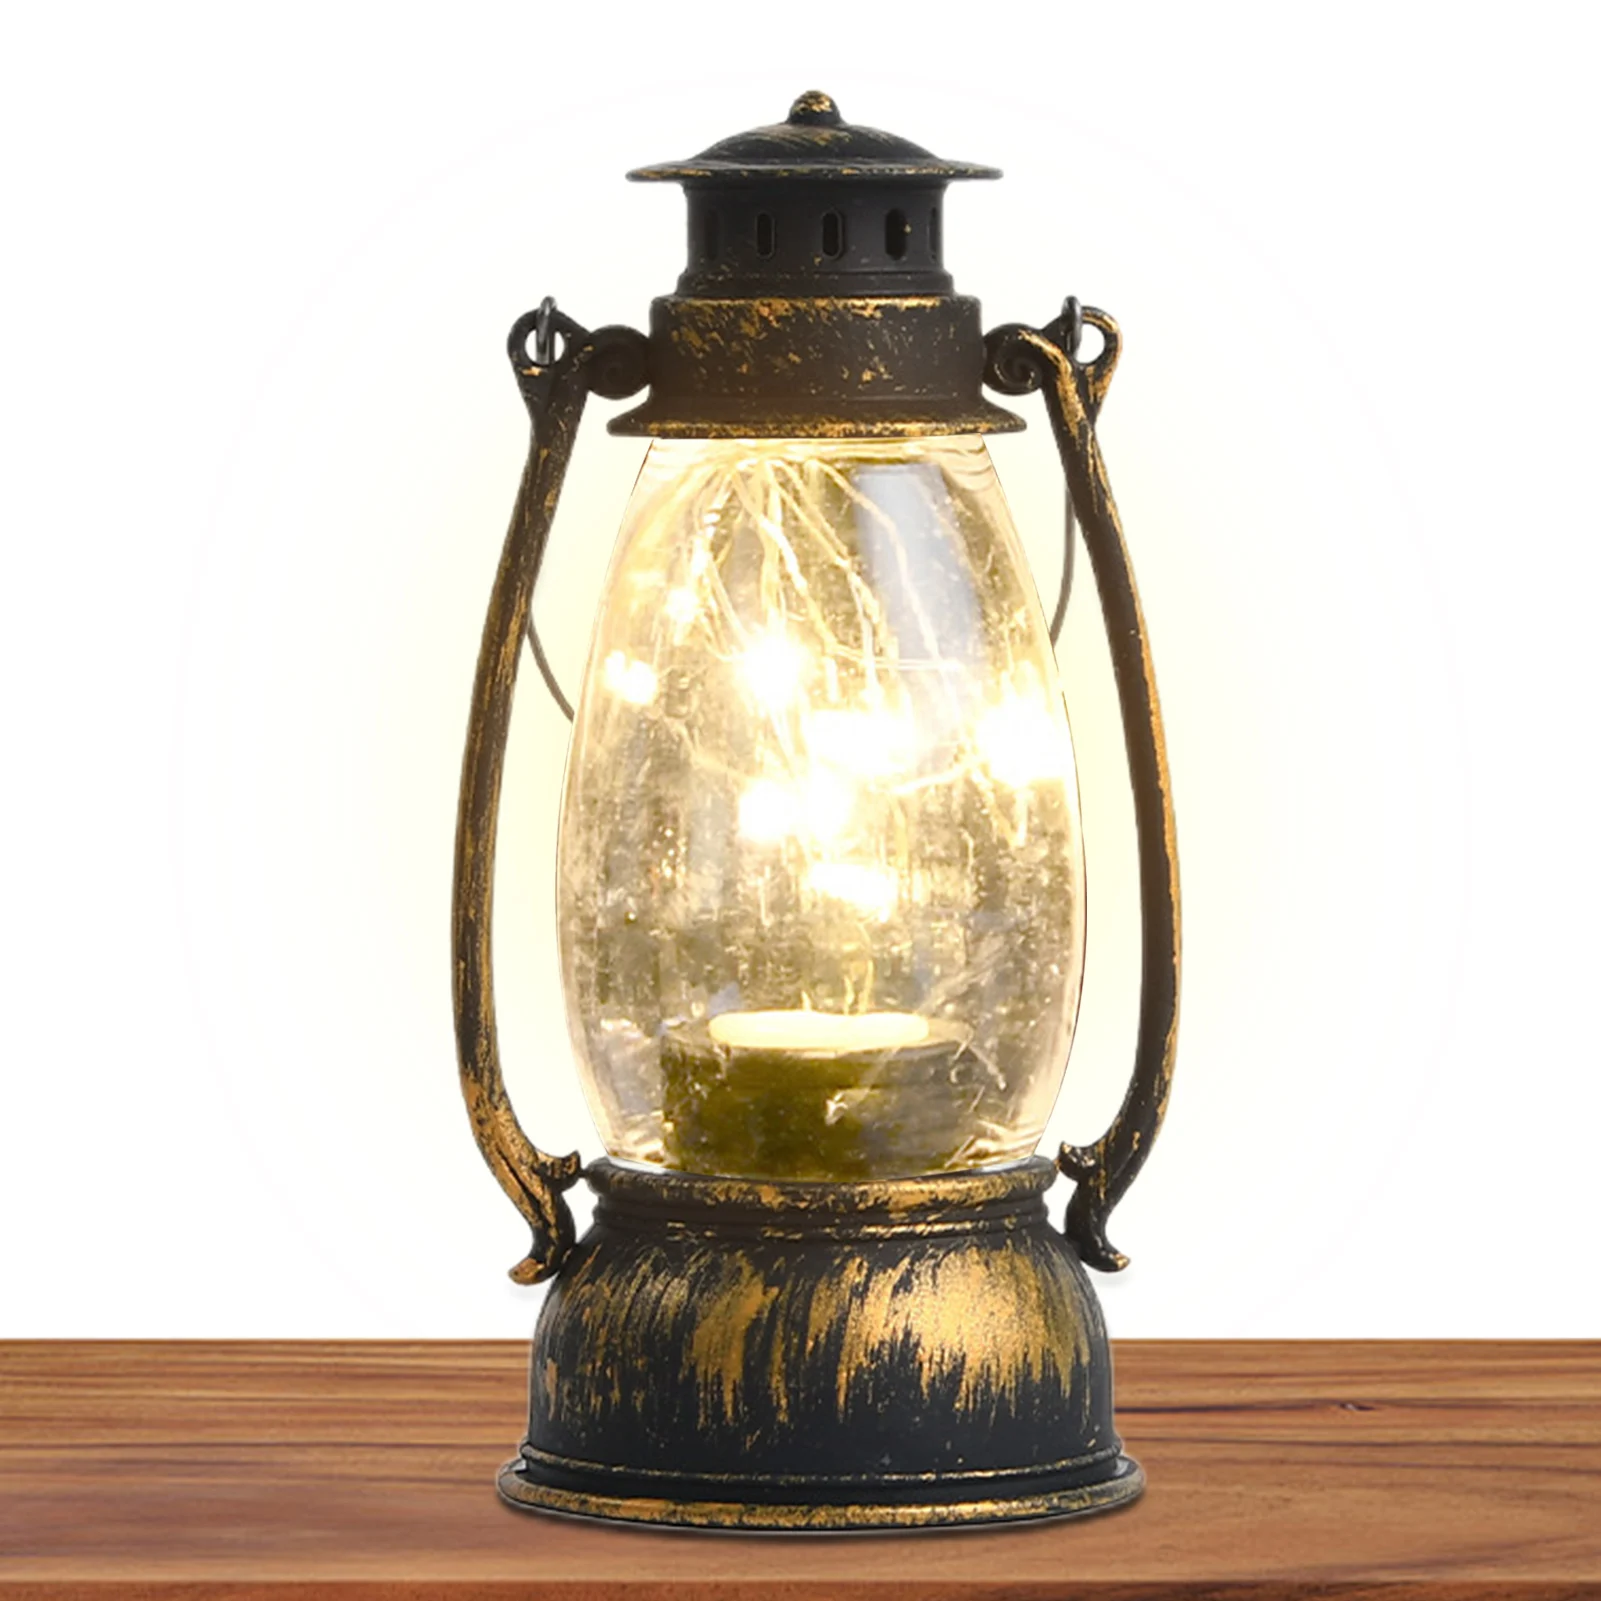 

Outdoor Battery Operated Lanterns Outdoor Camping Vintage Lanterns With Wired Or Dancing Flame Flameless Candle Battery Operated